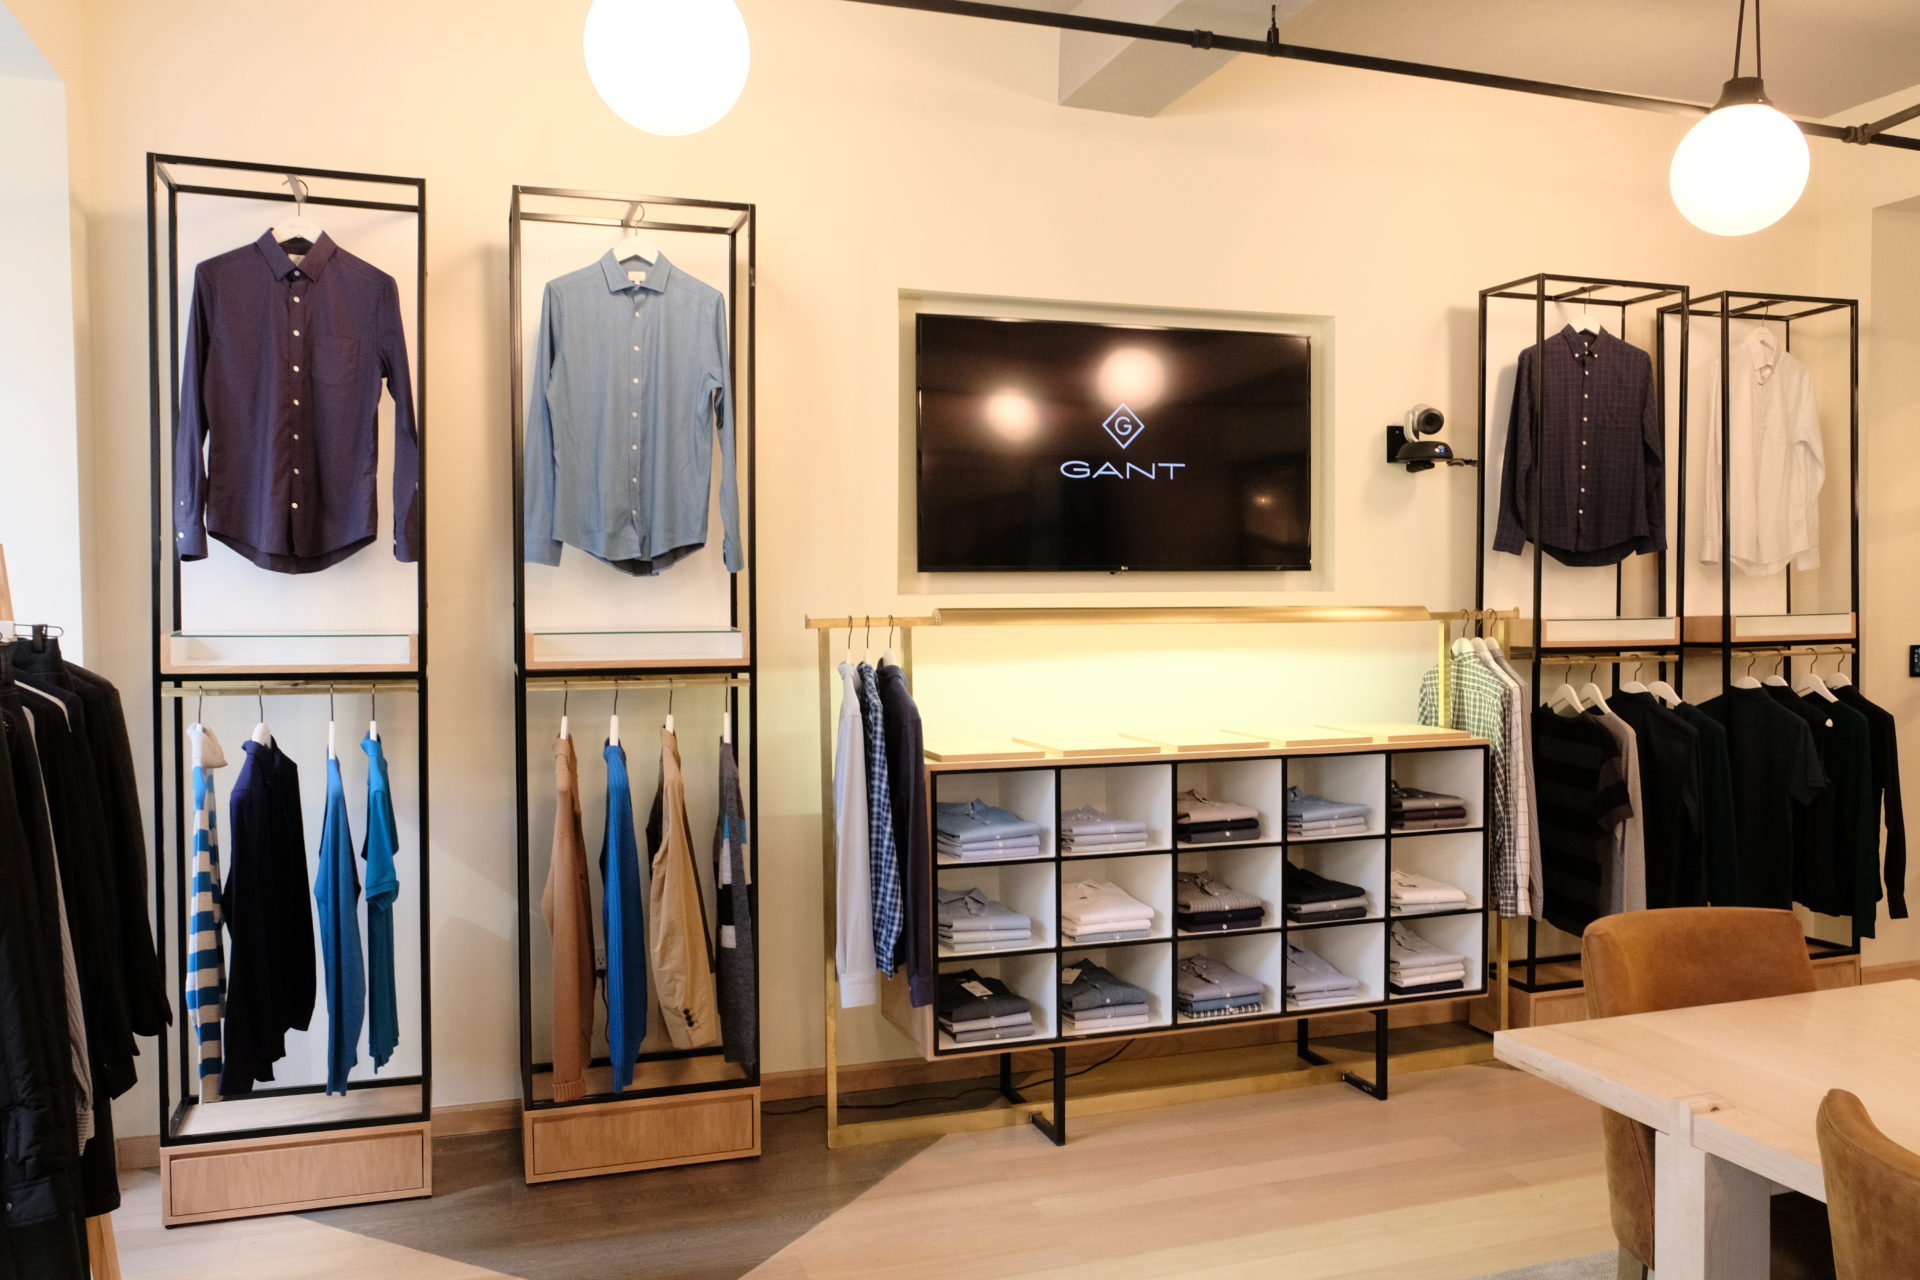 Store Environments | Use Localized Retail Design Environments to ...